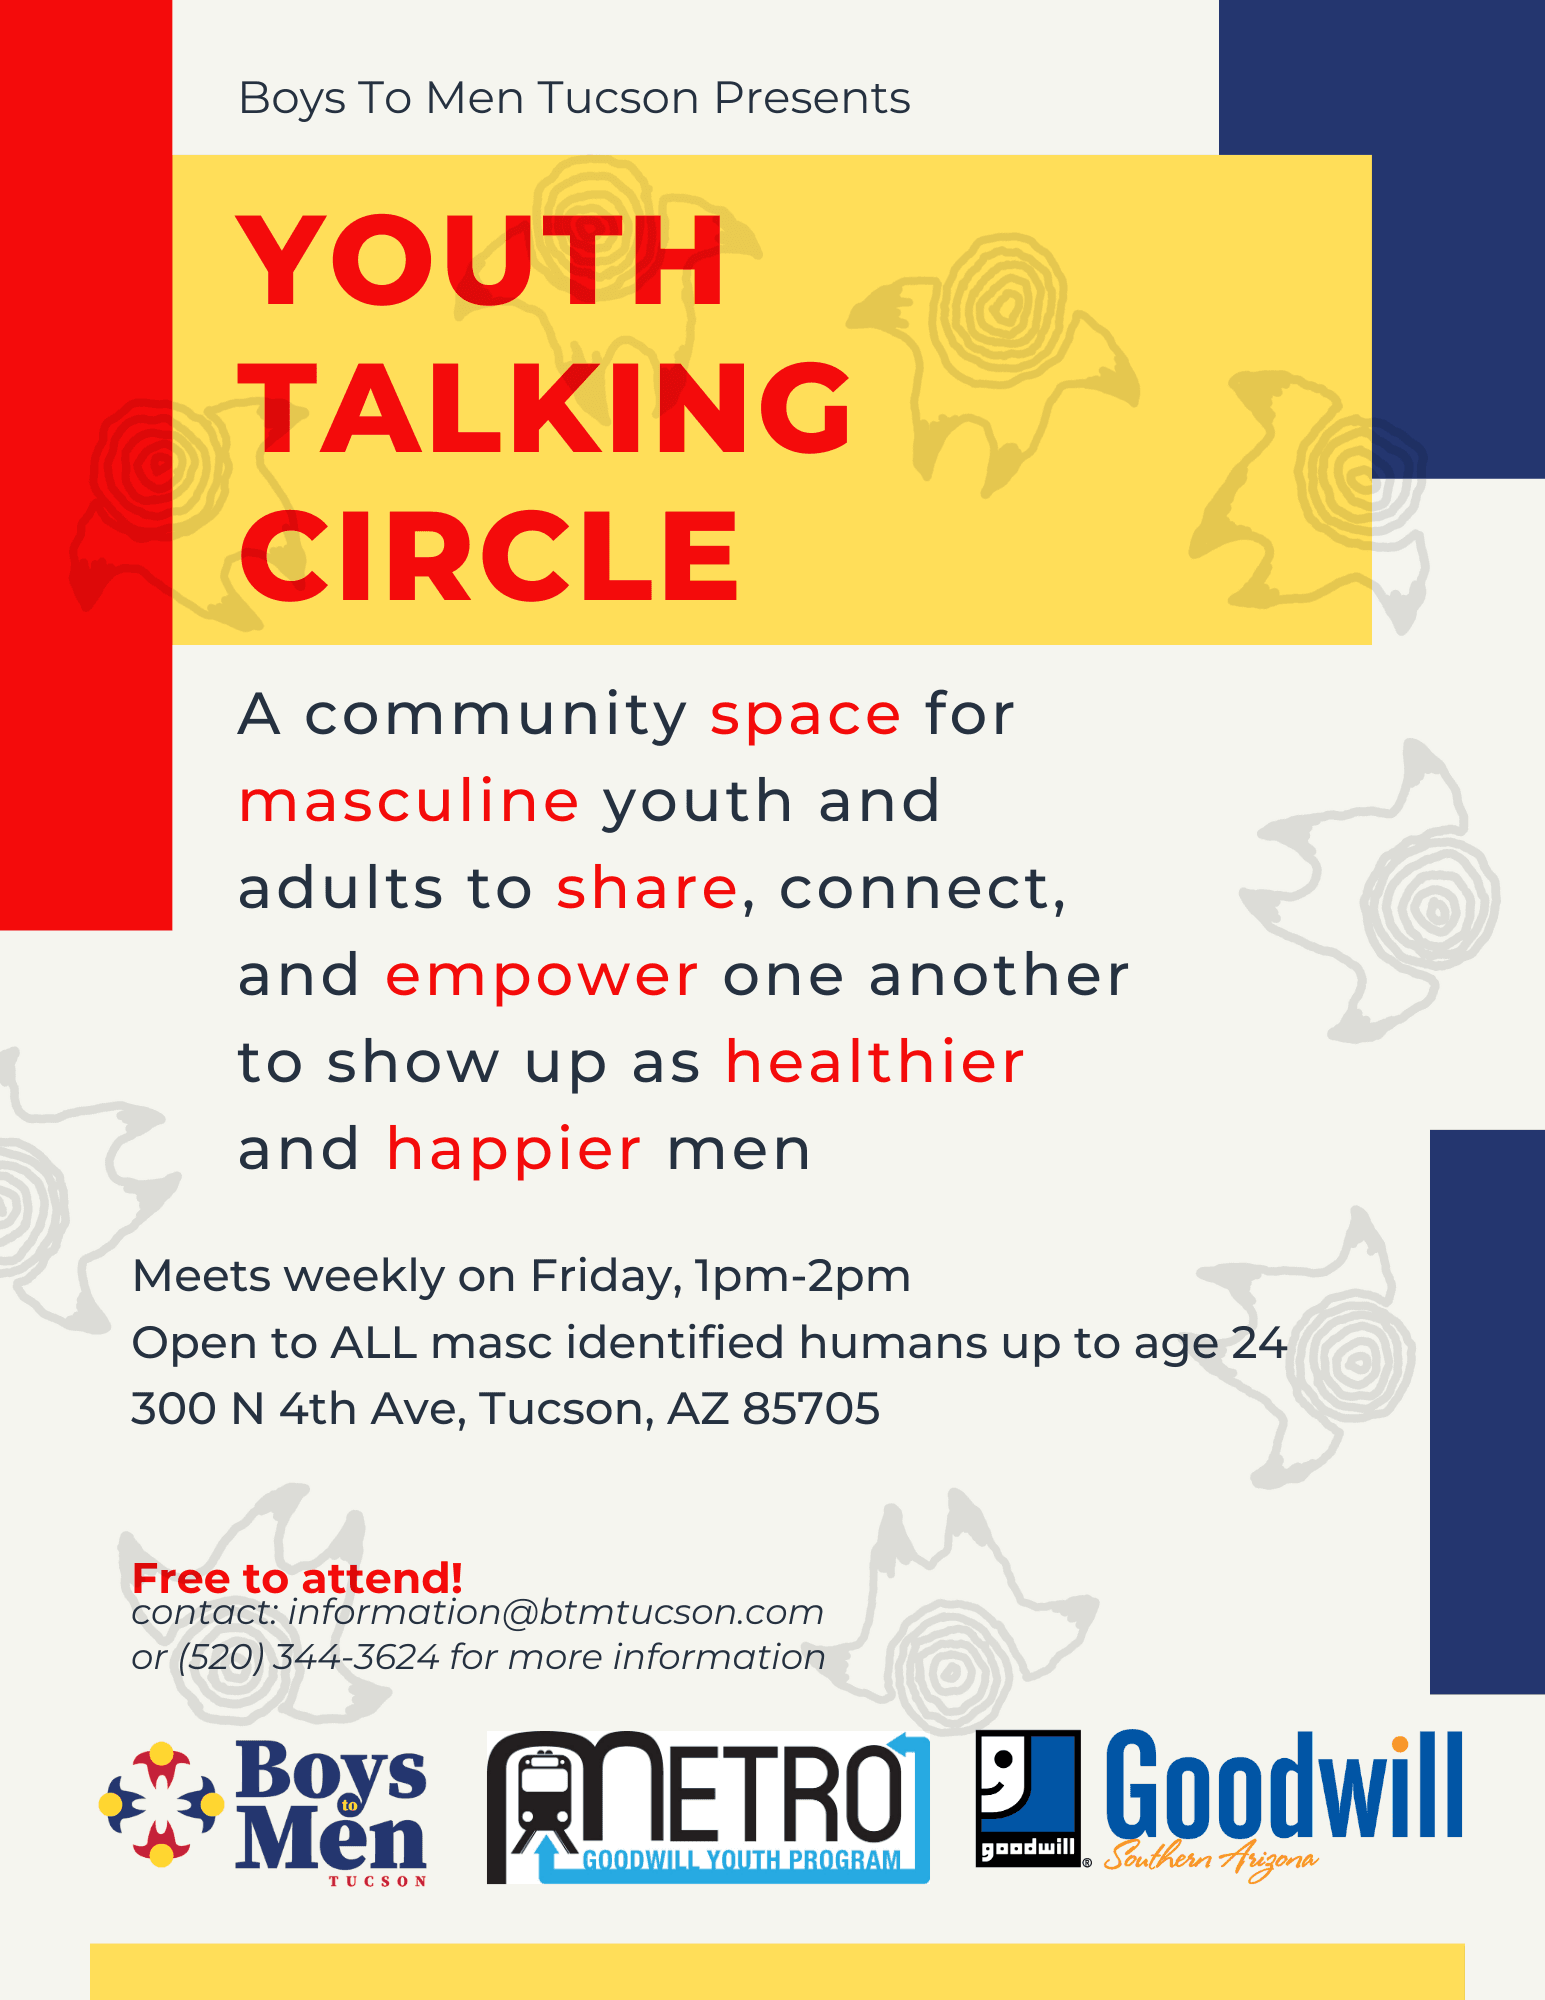 Weekly youth talking circle that takes place at Goodwill Metro